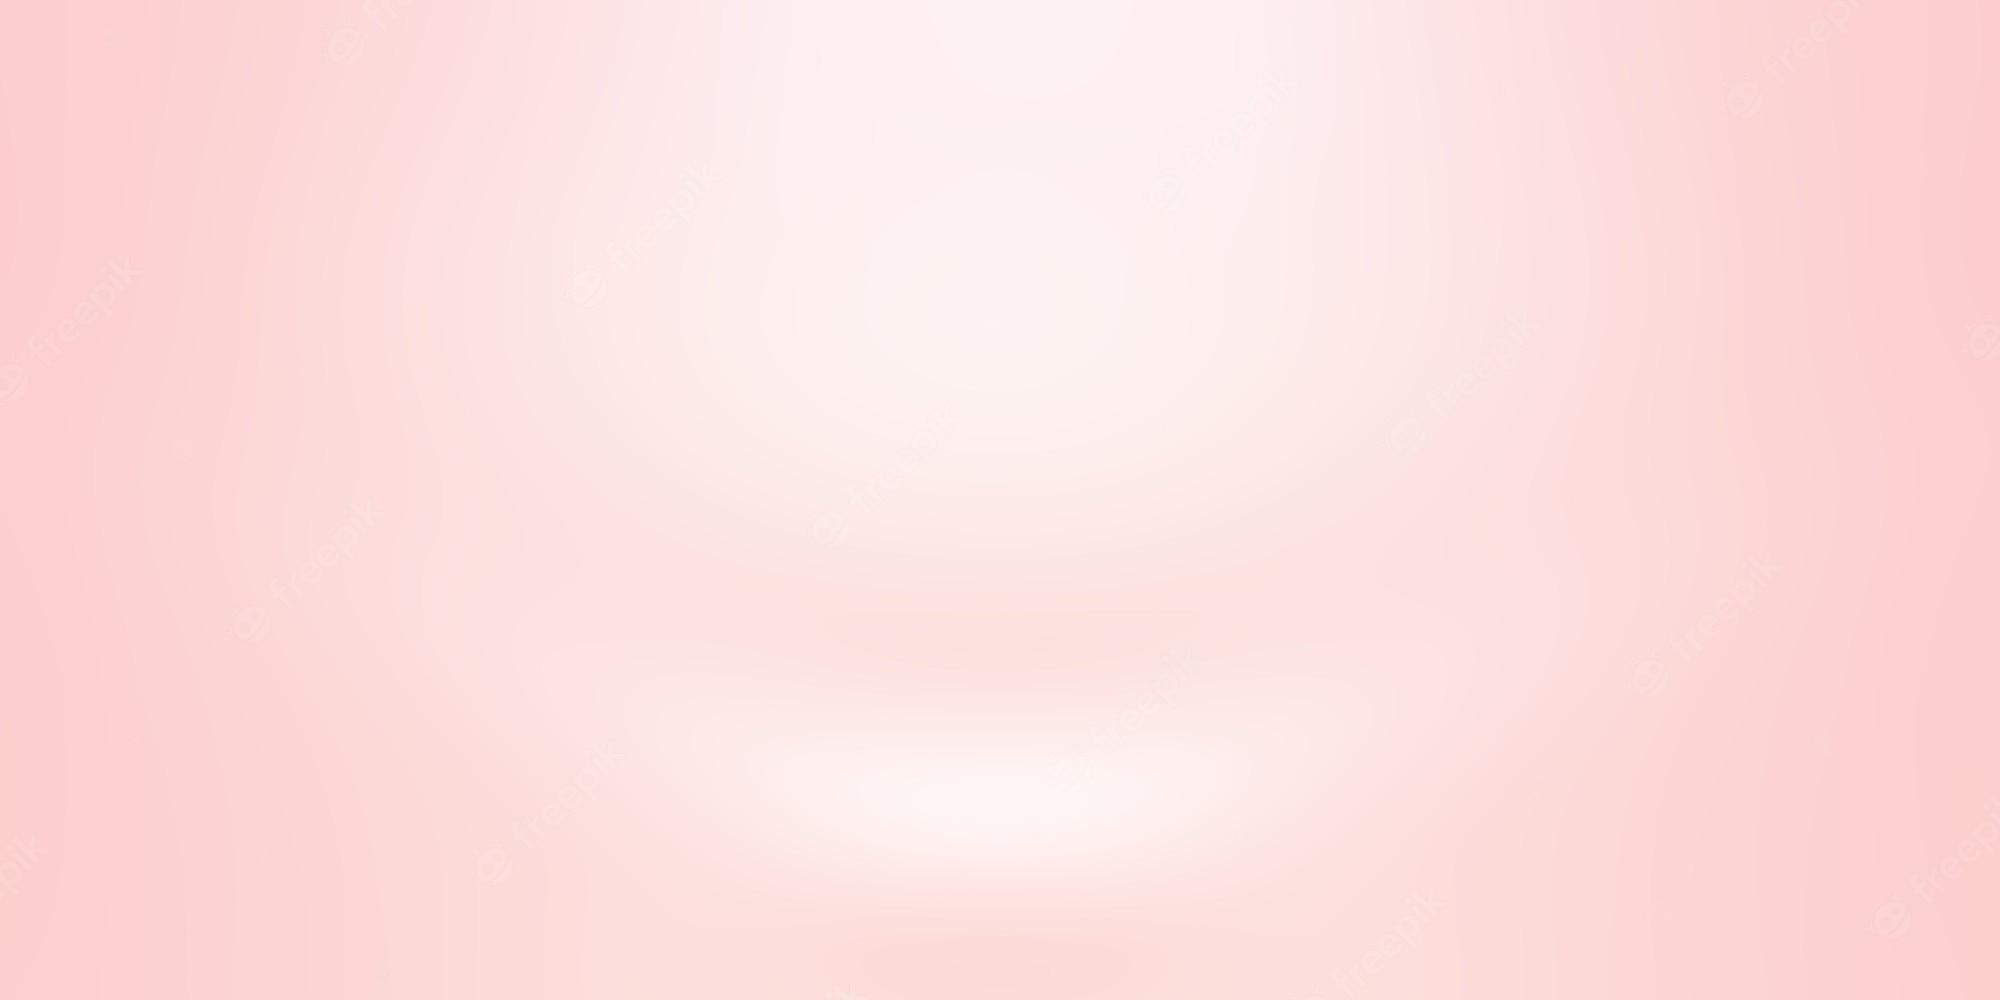 Light pink background Image. Free Vectors, & PSD